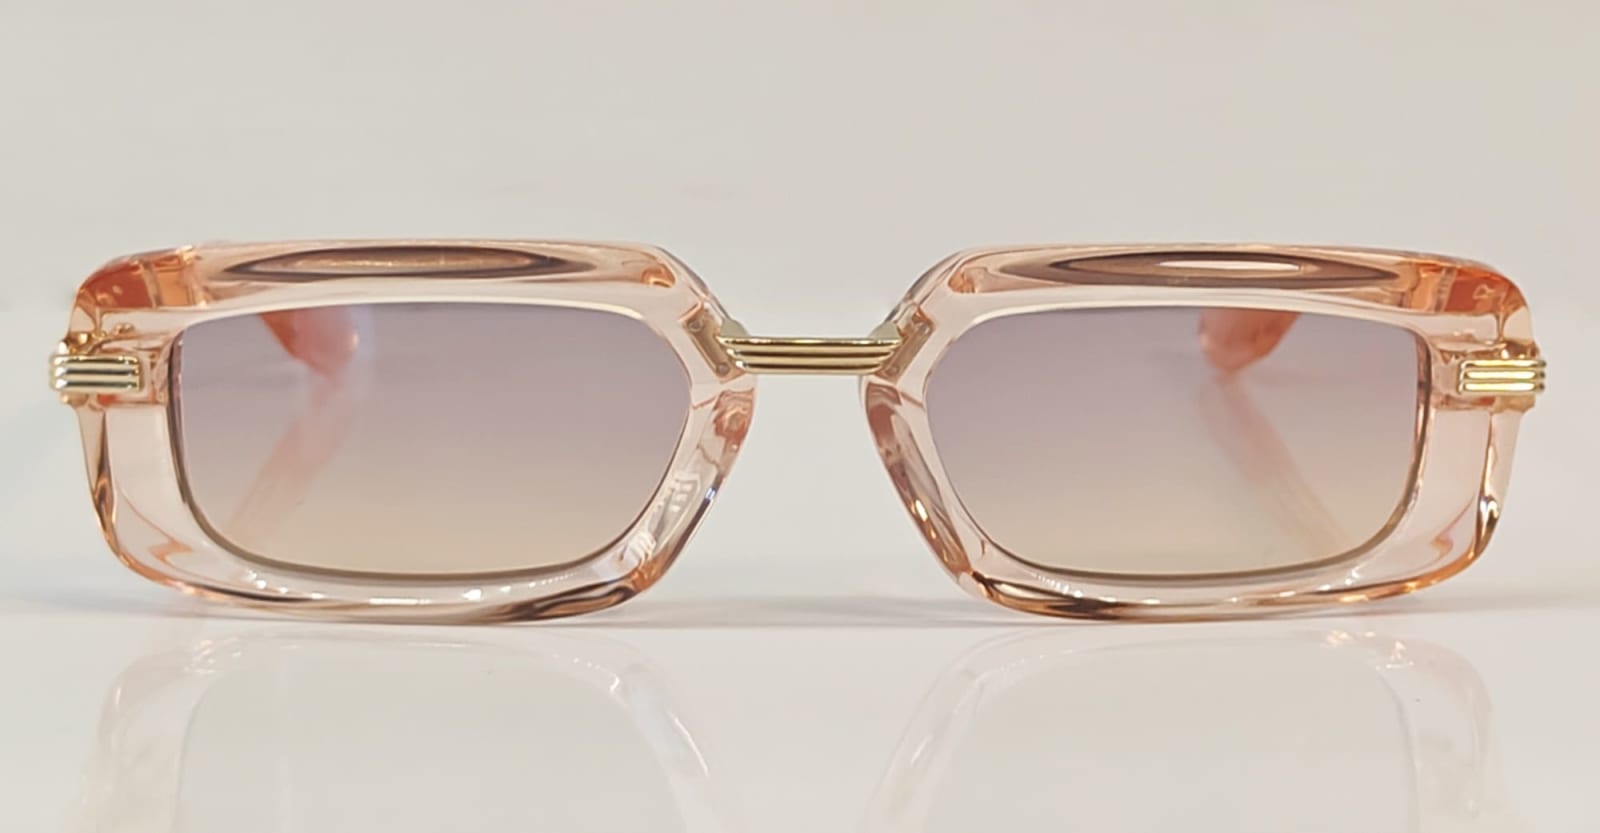 Chrome Hearts Asstravagant - Pink Crystal Sunglasses In Pink/gold